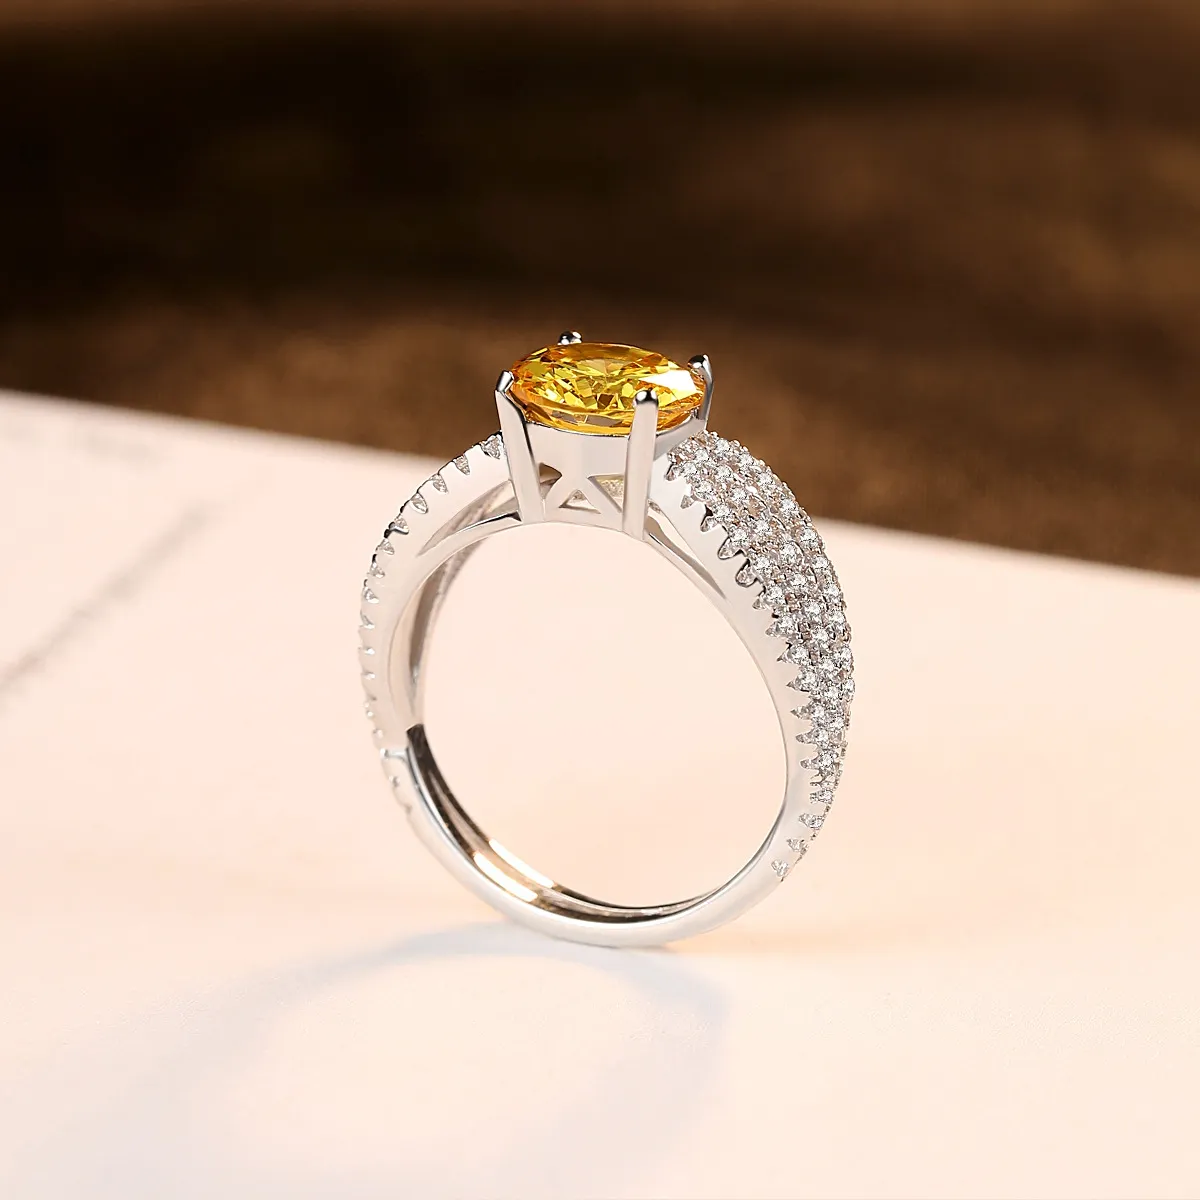 S925 Sterling Silver Ring Brand AAA Zircon Yellow Crystal Ring Luxury High end Ring European and American Hot Fashion Women Ring Valentine's Day Mother's Day Gift spc